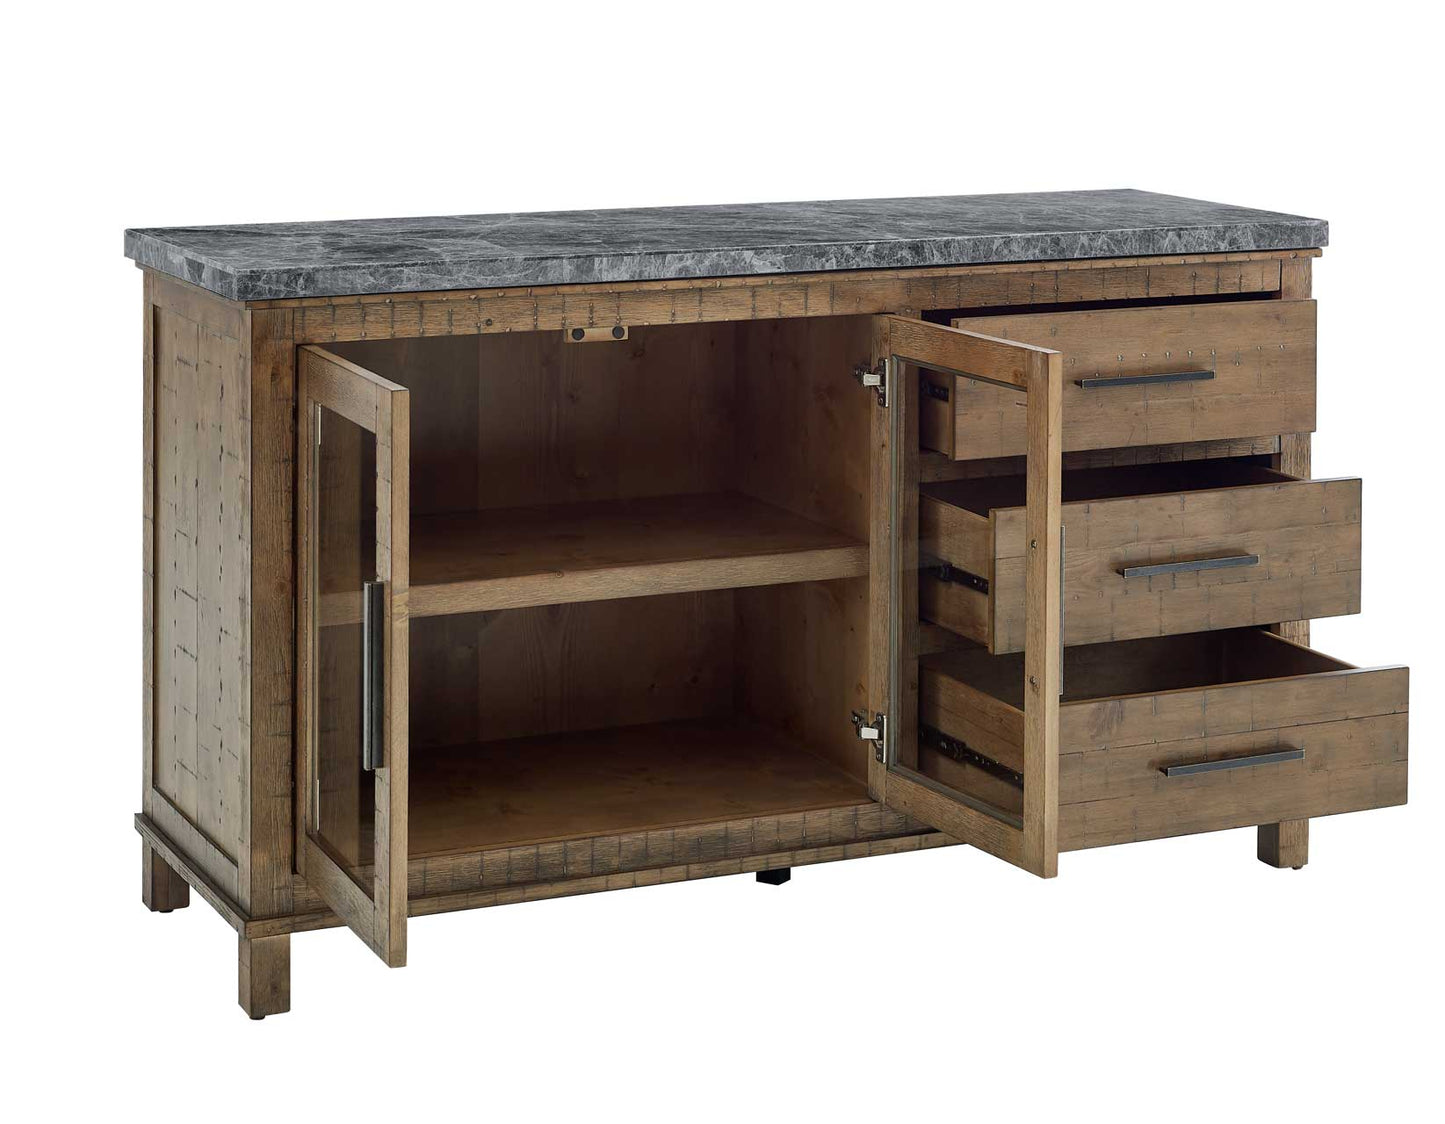 Grayson Marble Top Counter Storage Dining Set